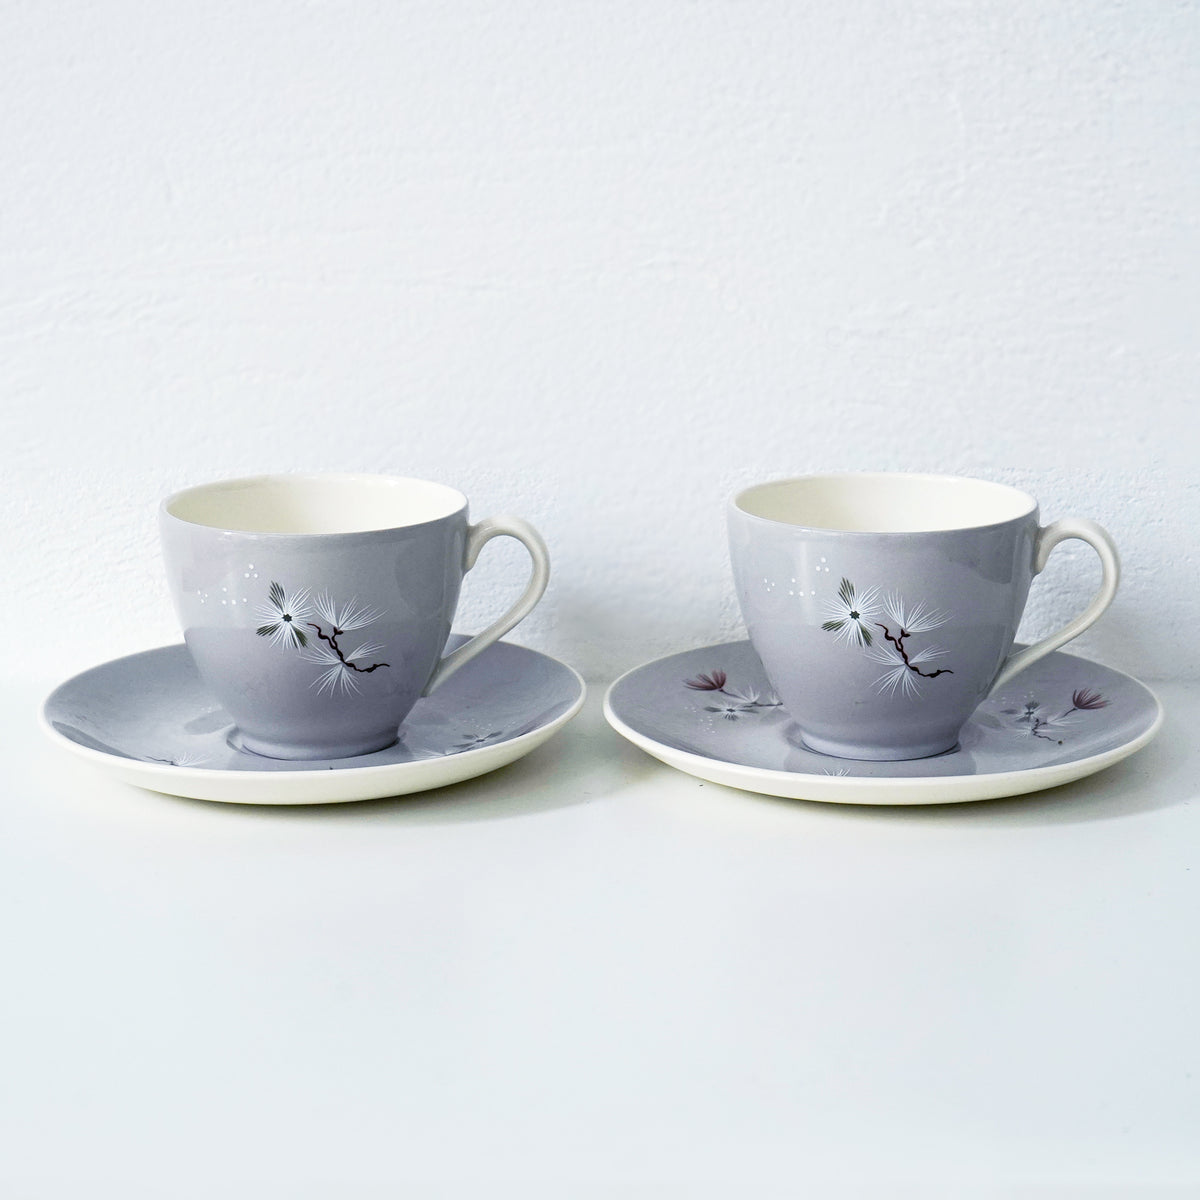 Royal Doulton Cup & Saucer / 英国 ロイヤルドルトン カップ＆ソーサー２客セット (Frost Pine)